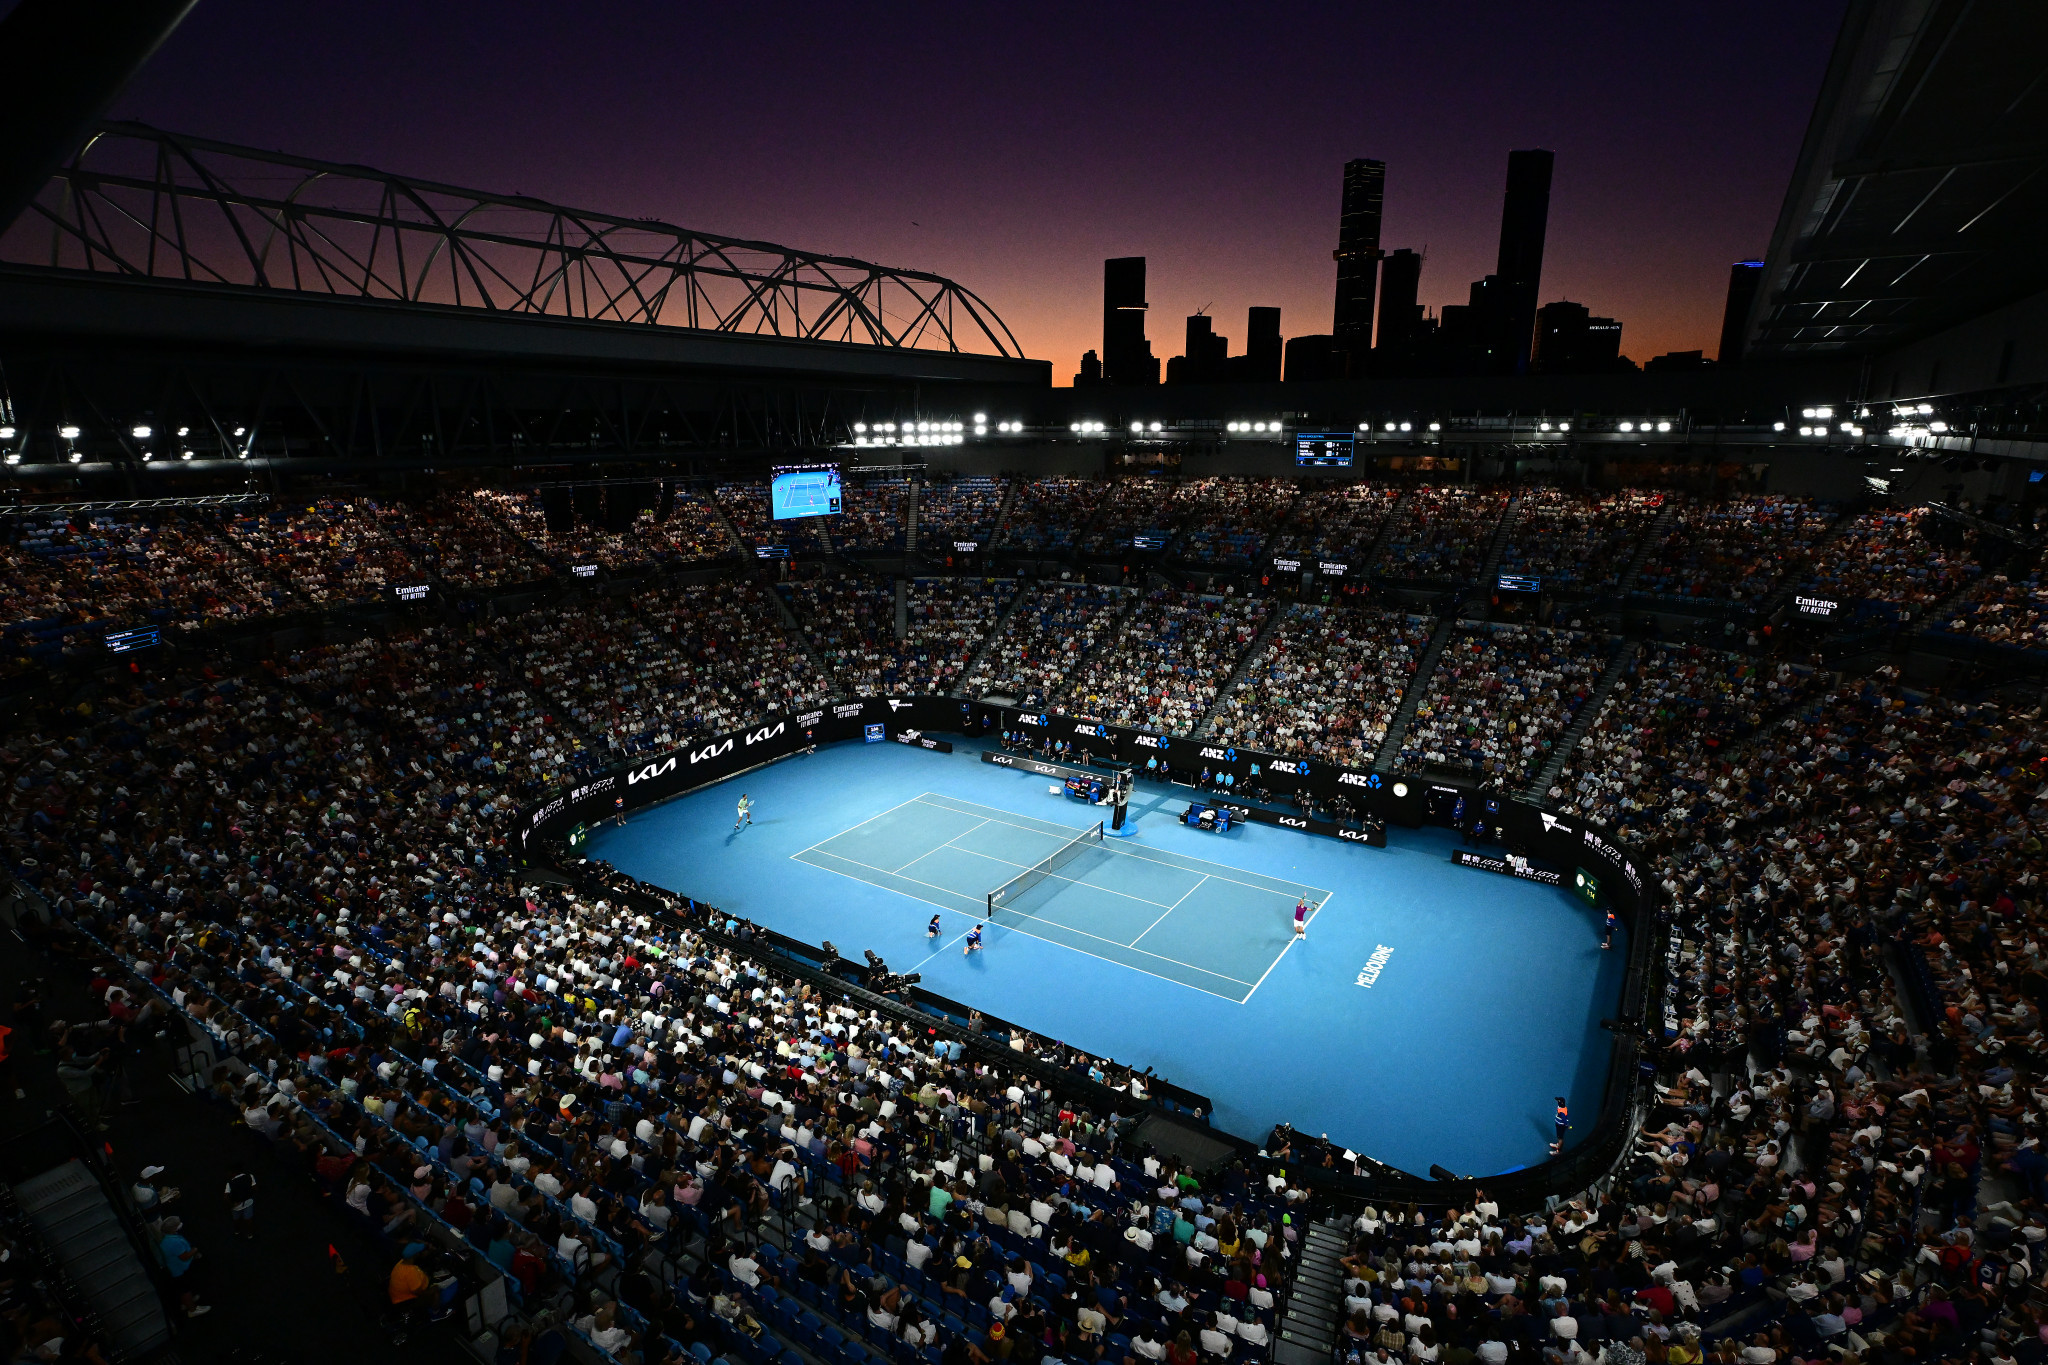 The Grand Slam Player Development Programme will award $975,000 to players in 2022 ©ITF